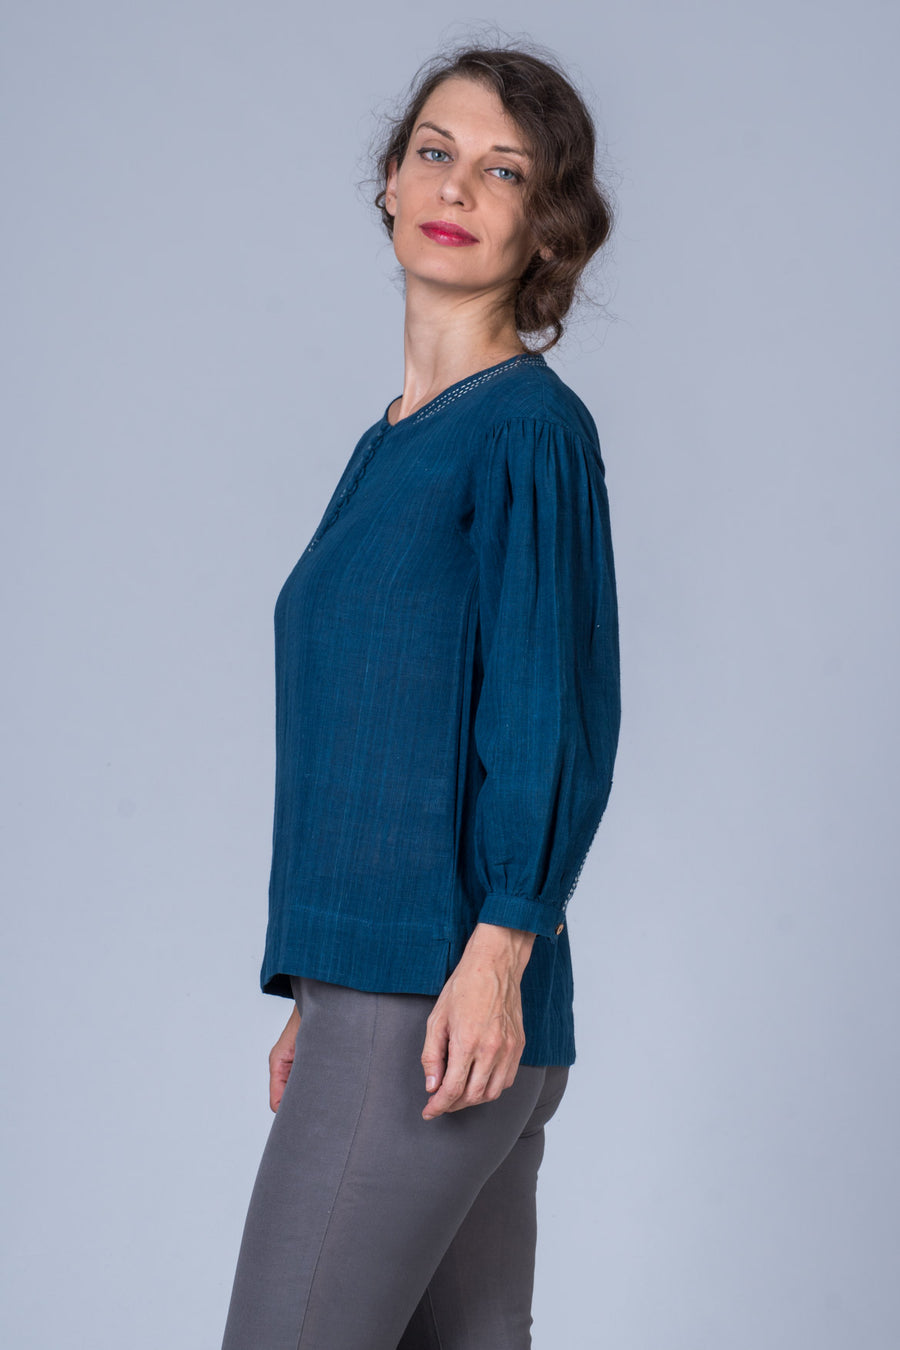 Indigo Dyed Handwoven Top - WHICH